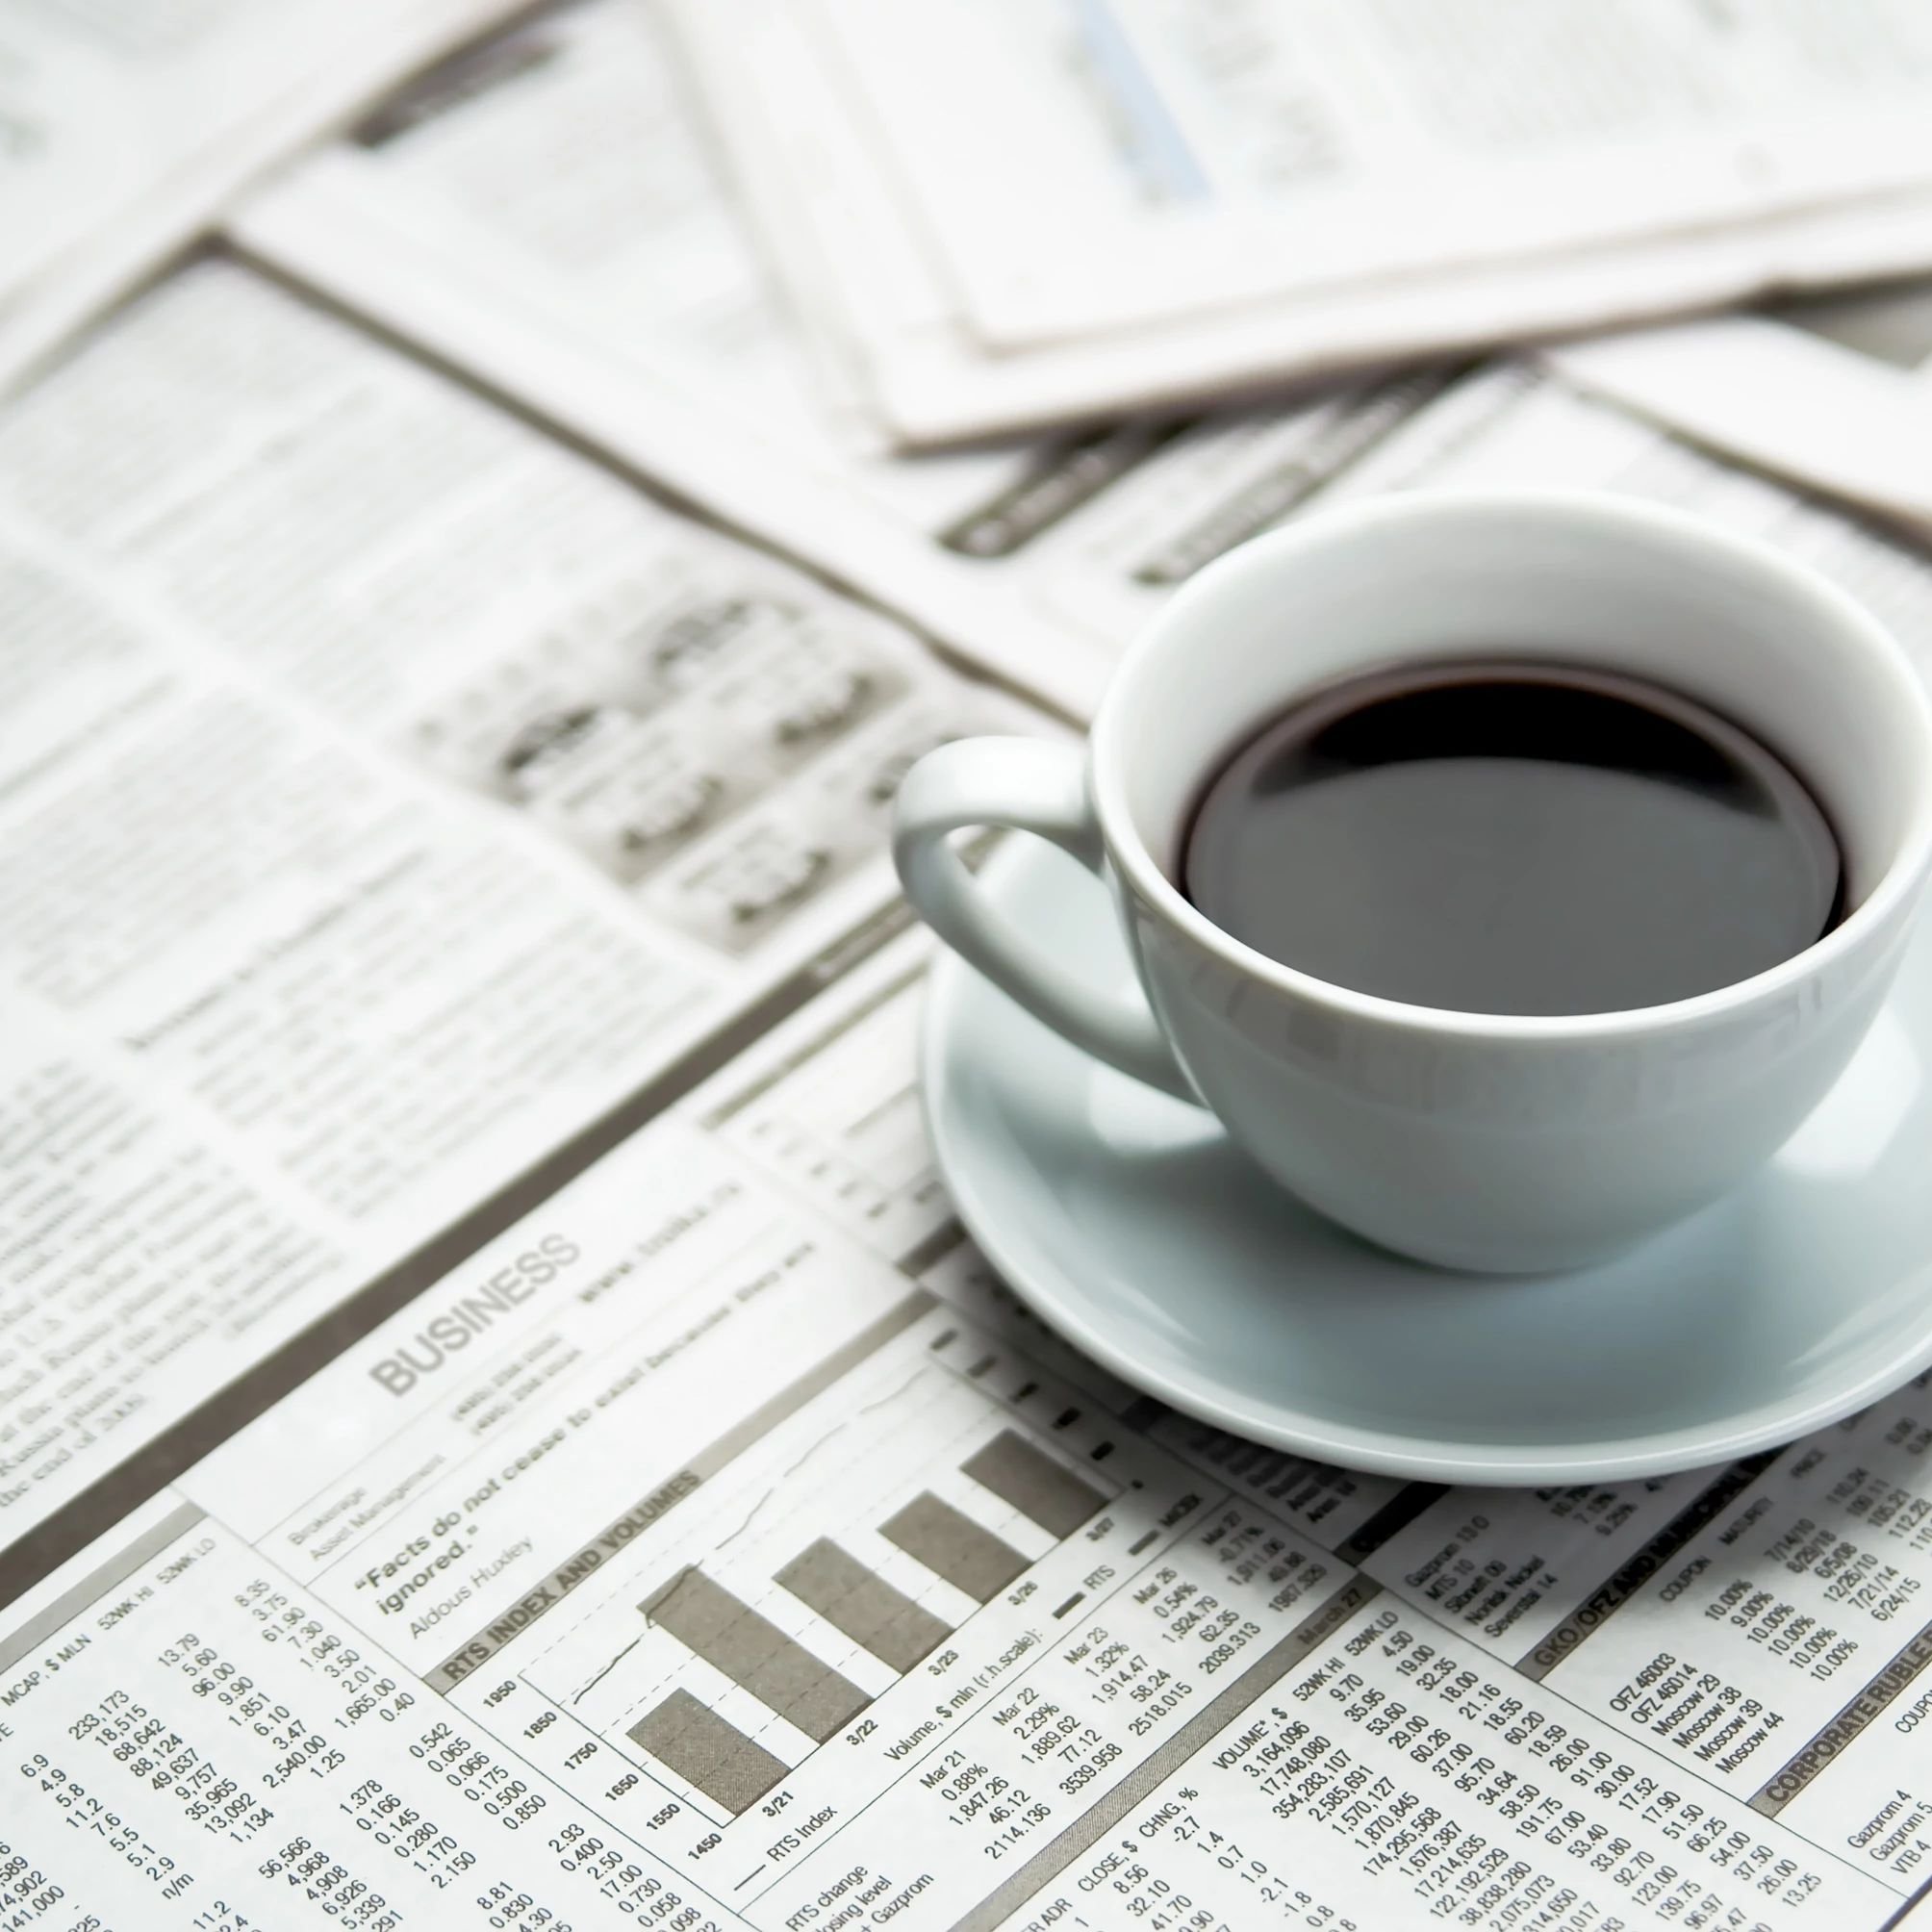 A cup of coffee on the newspaper